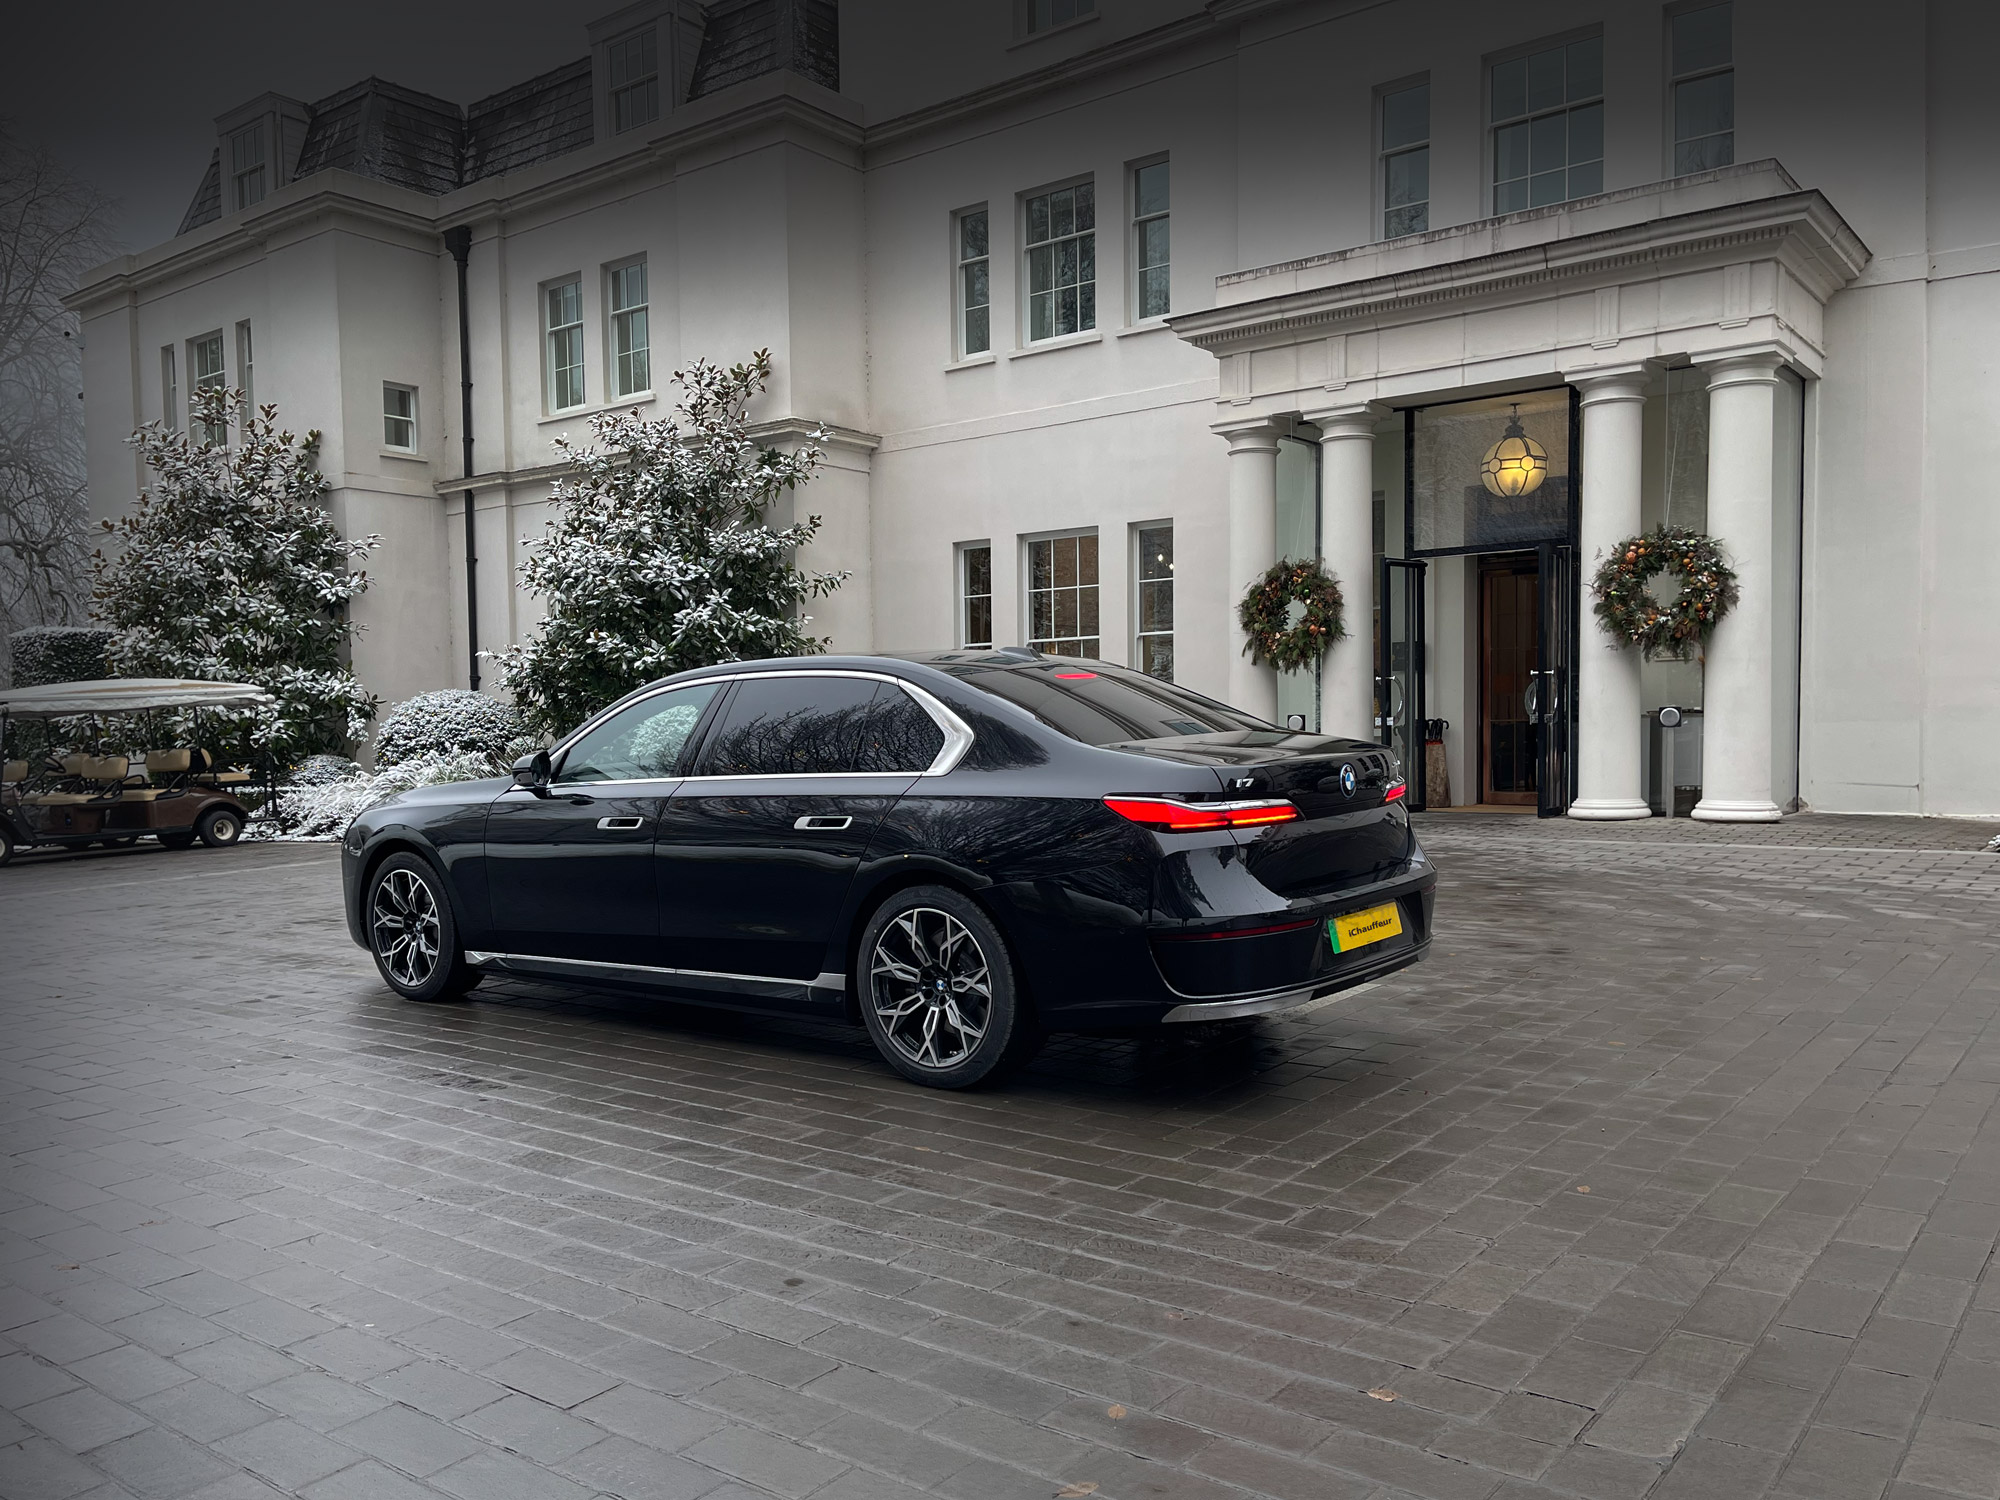 Black BMW i7 chauffeur car in front of Coworth Park, Ascot.